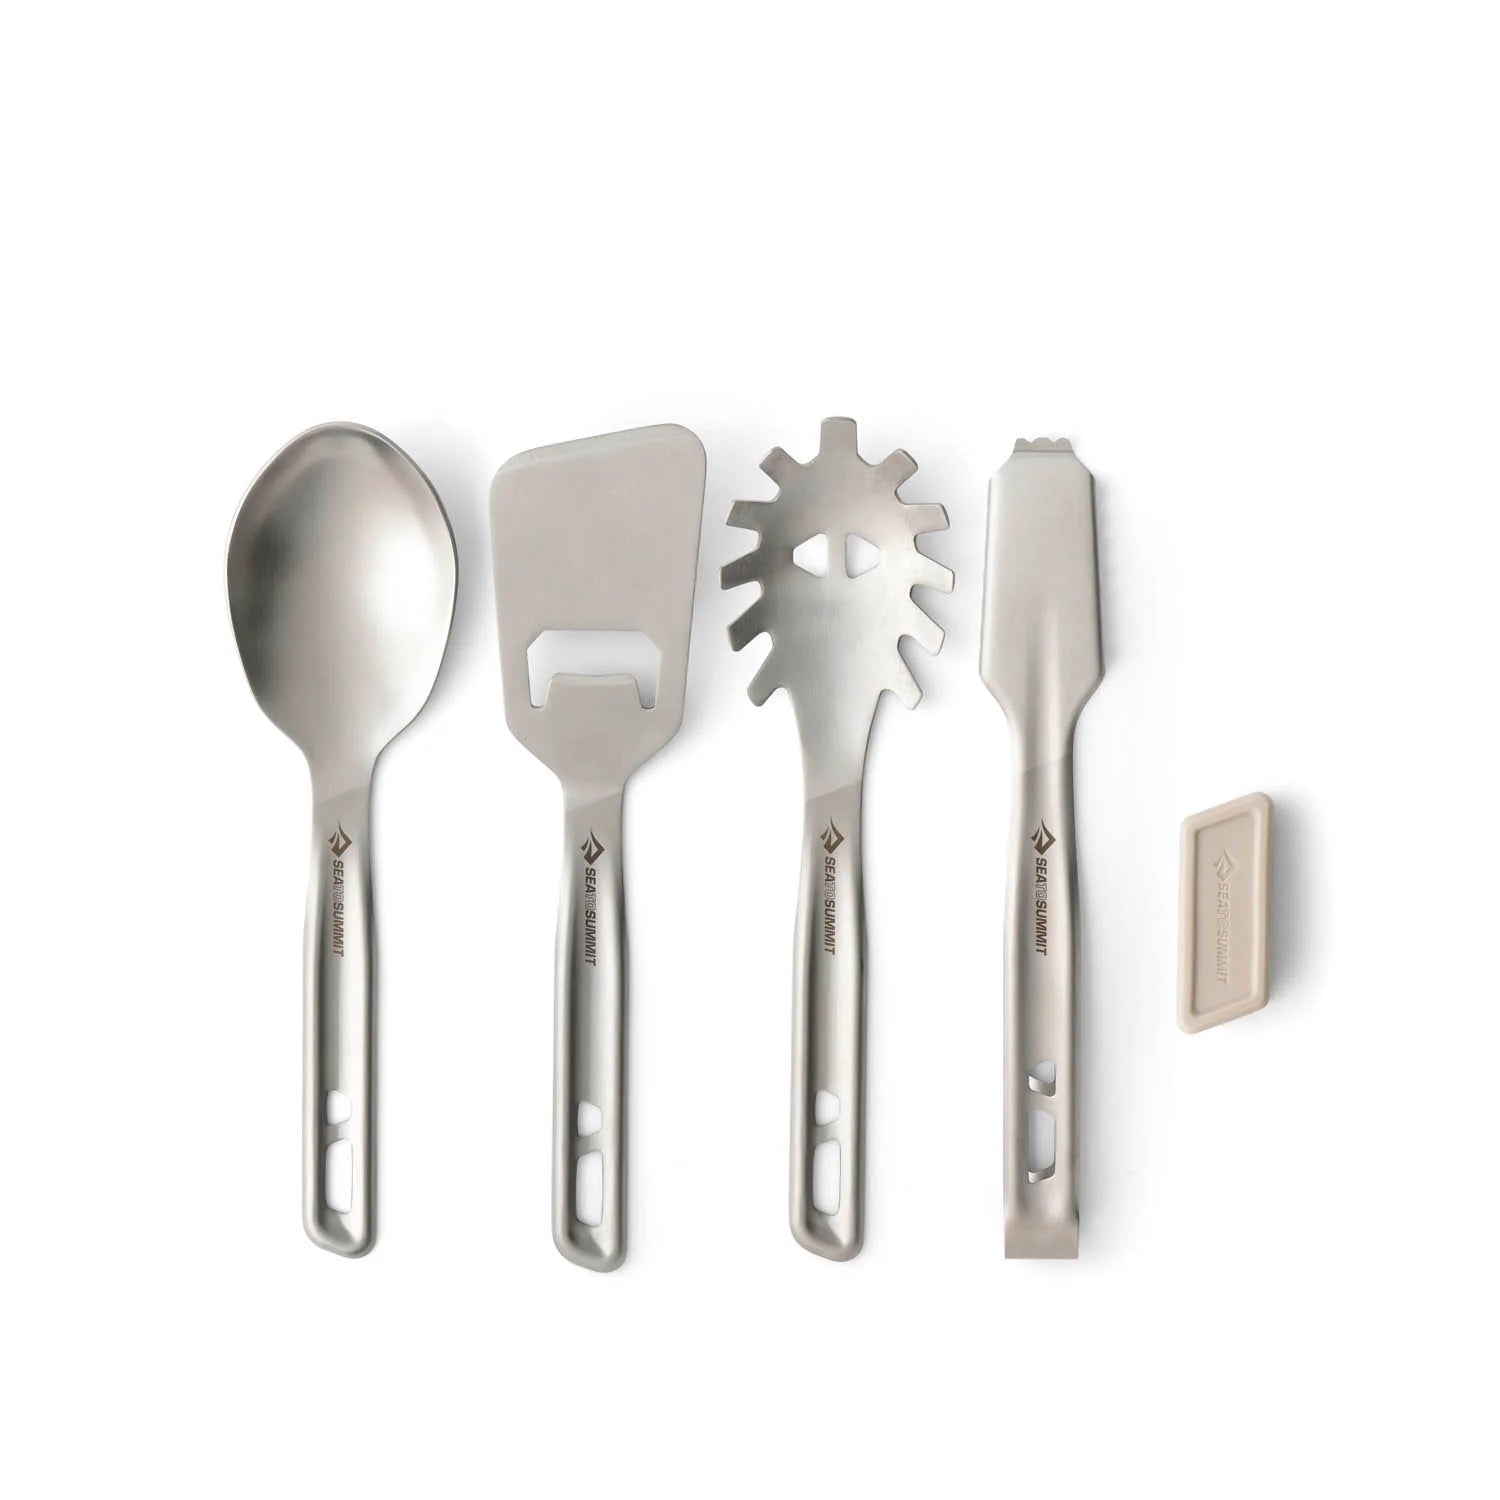 Sea to Summit Detour Stainless Steel Cutlery Set